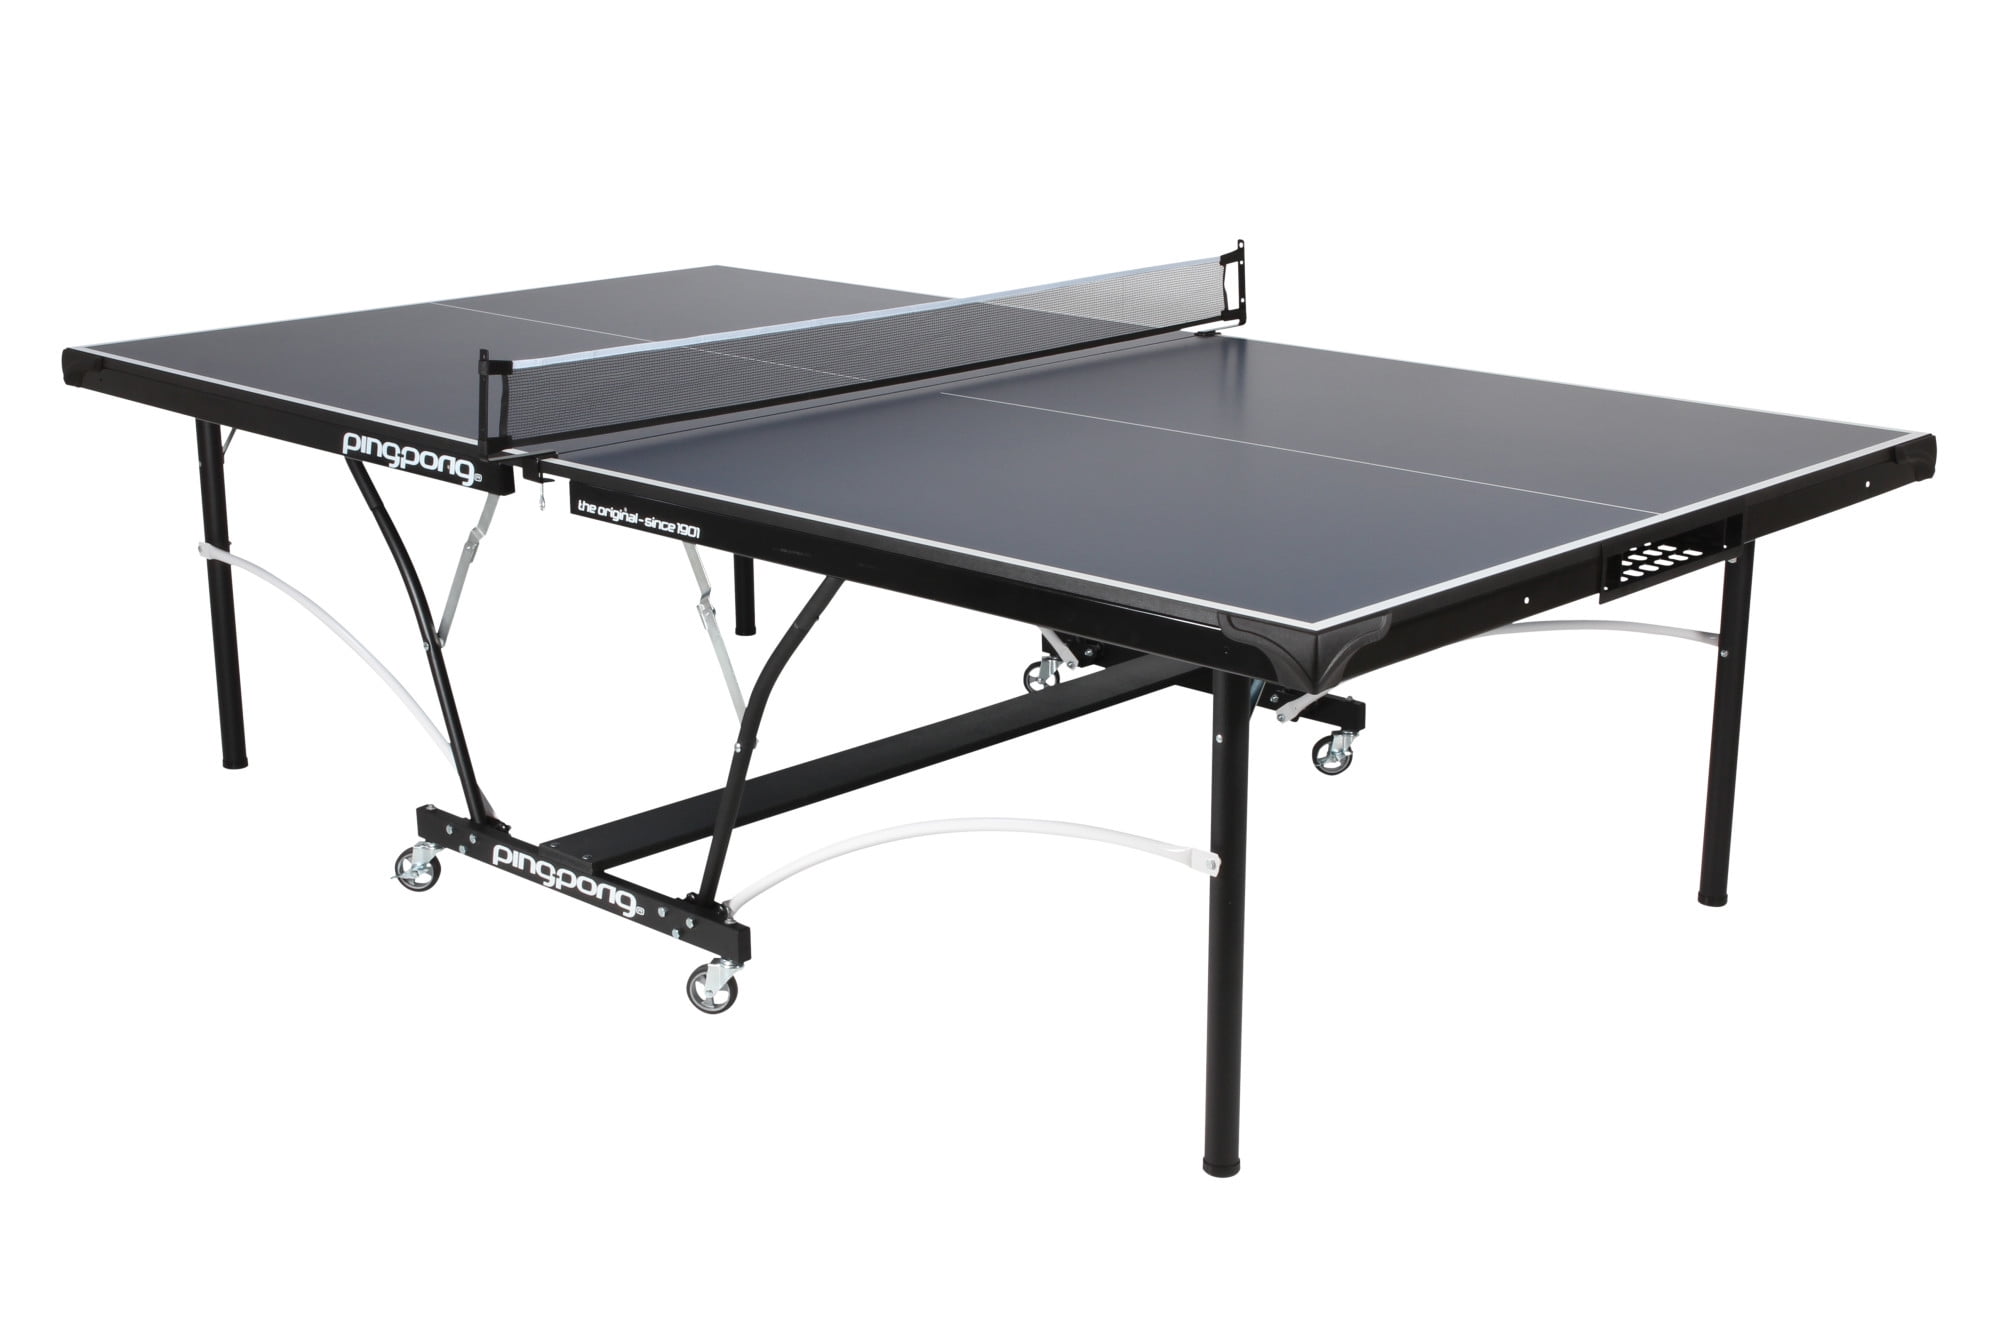 PING-PONG Ultra II Table Tennis Table 